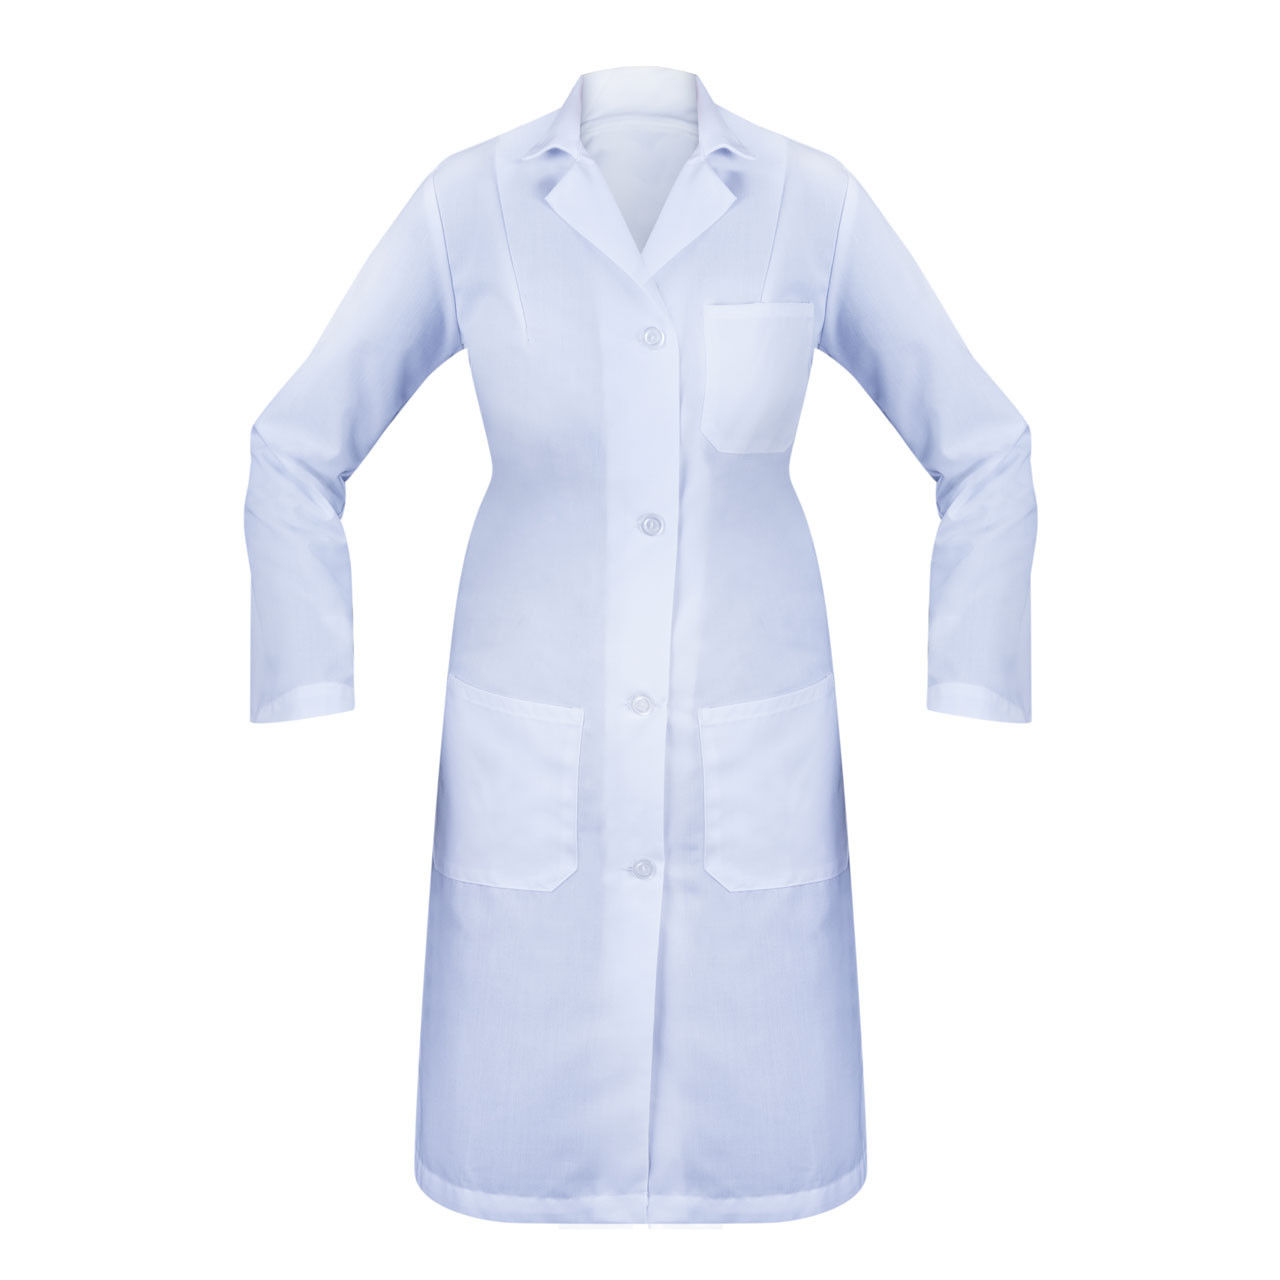 If I want less lab clothing than the case quantities, what should I do?